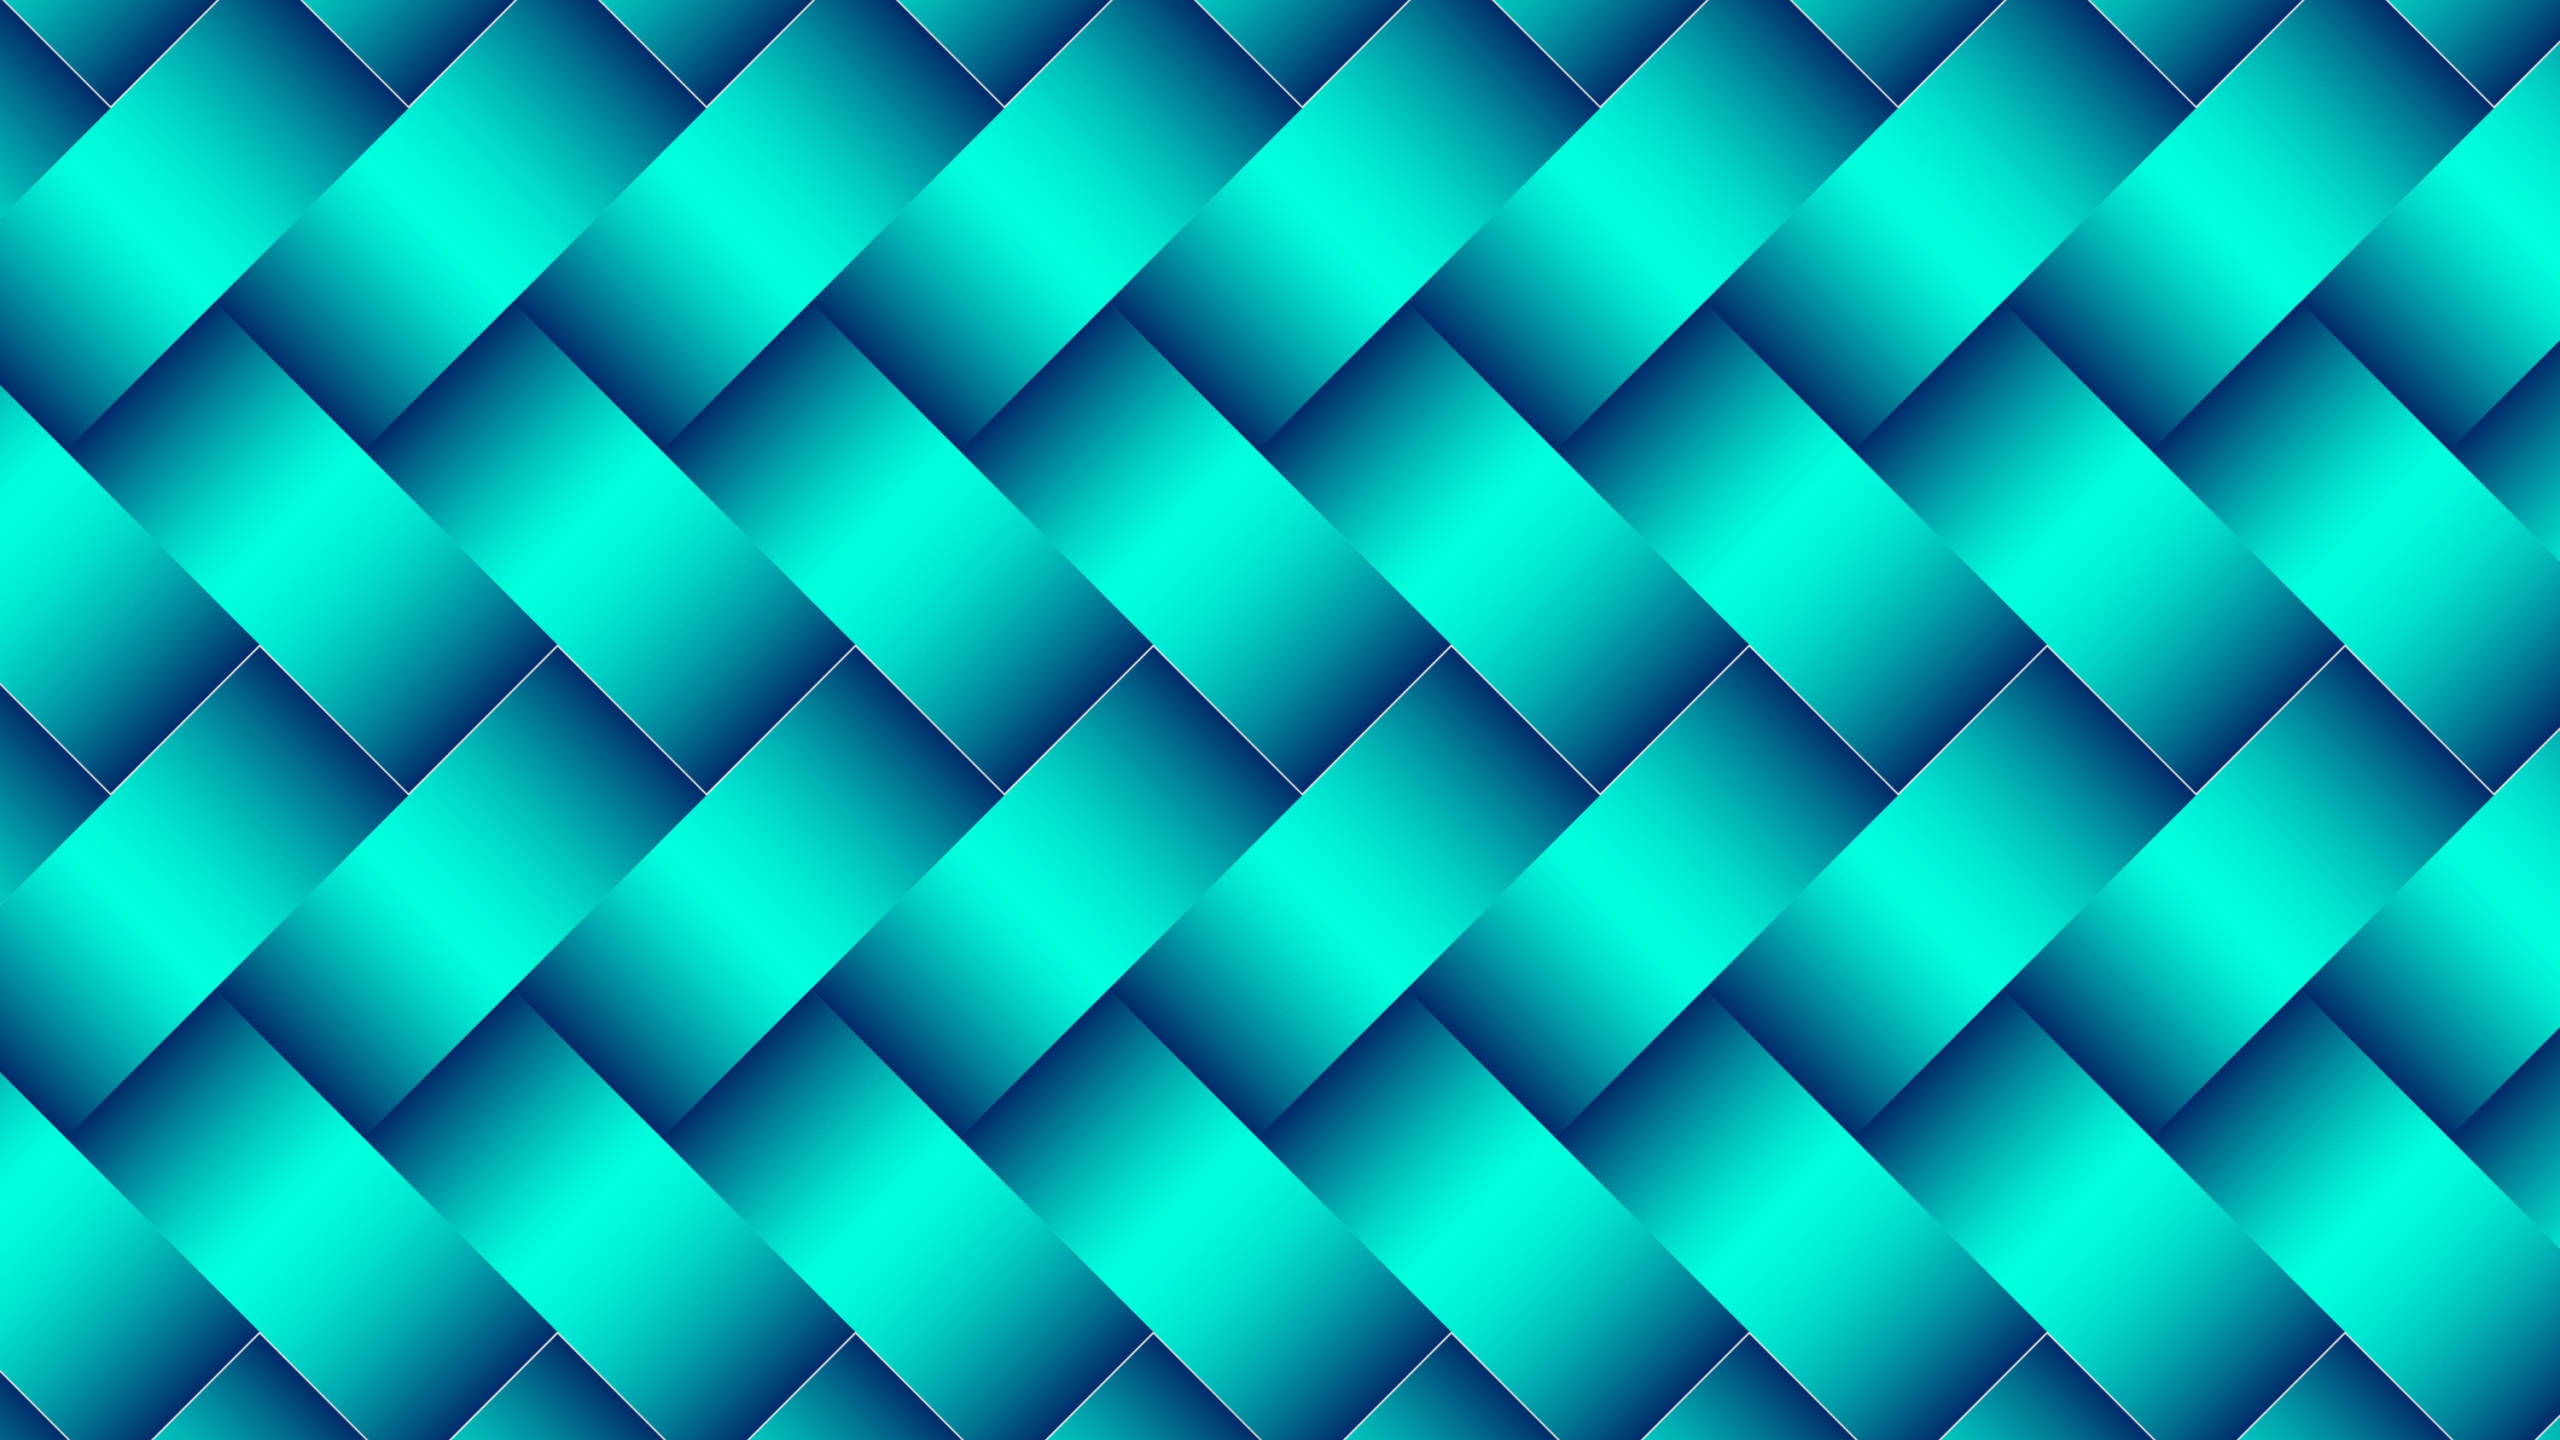 100+] Turquoise Blue Wallpapers | Wallpapers.com